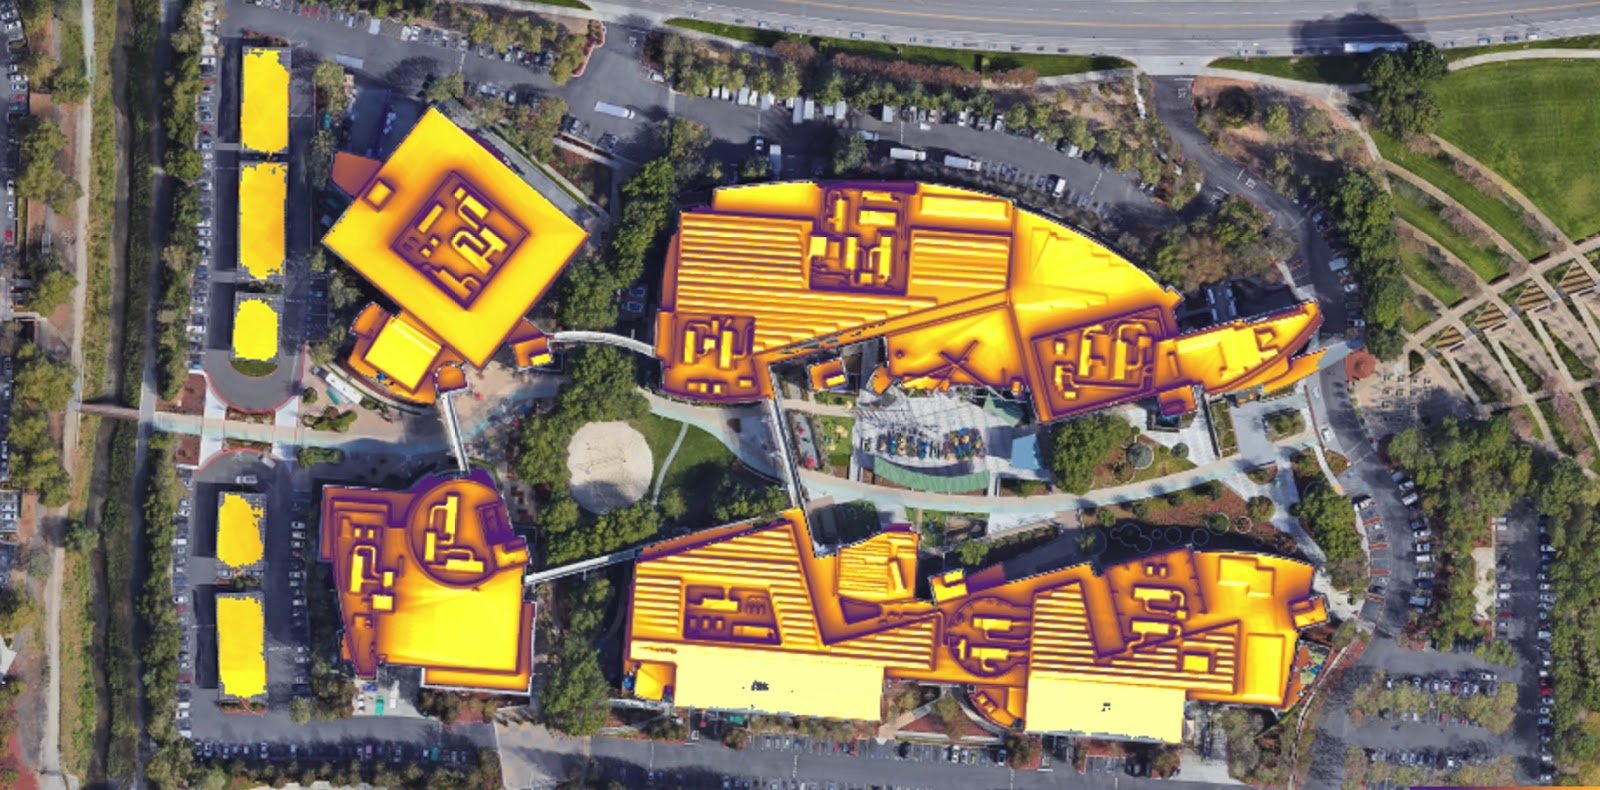 Google's Project Sunroof Data: 79% of US rooftops analyzed are viable for solar - is ...